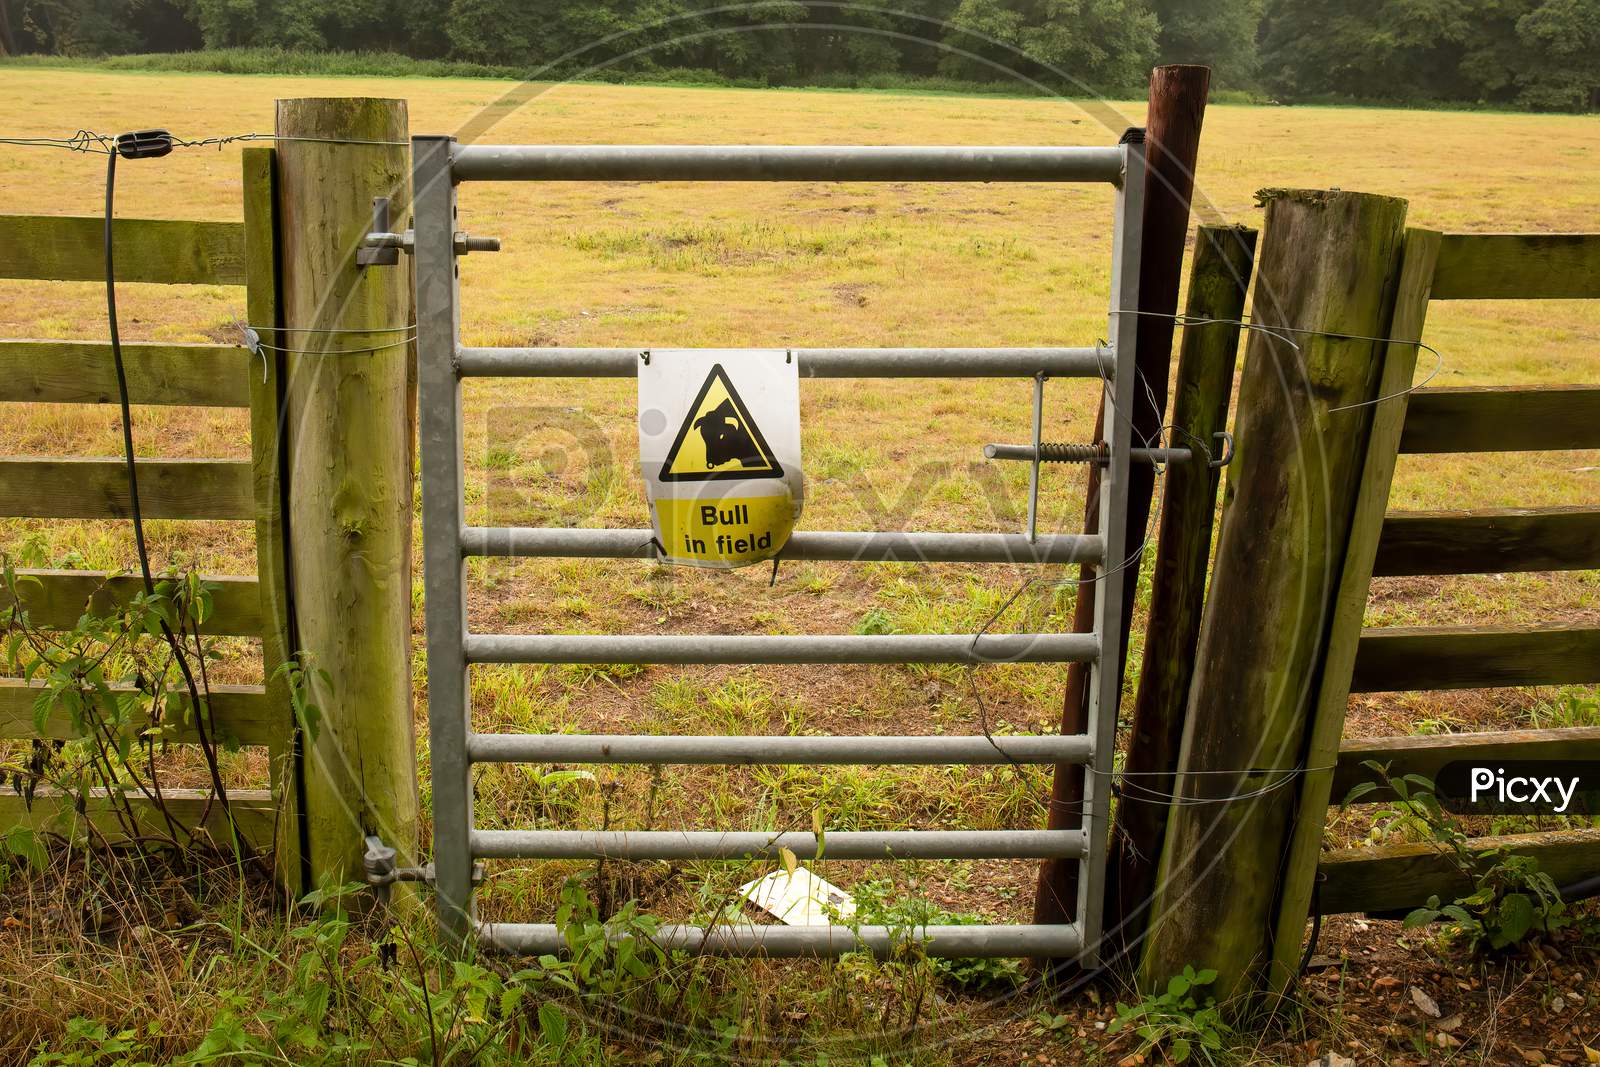 Warning Sign Bull In Field, Yellow Triangle With Bull Head Symbol On White